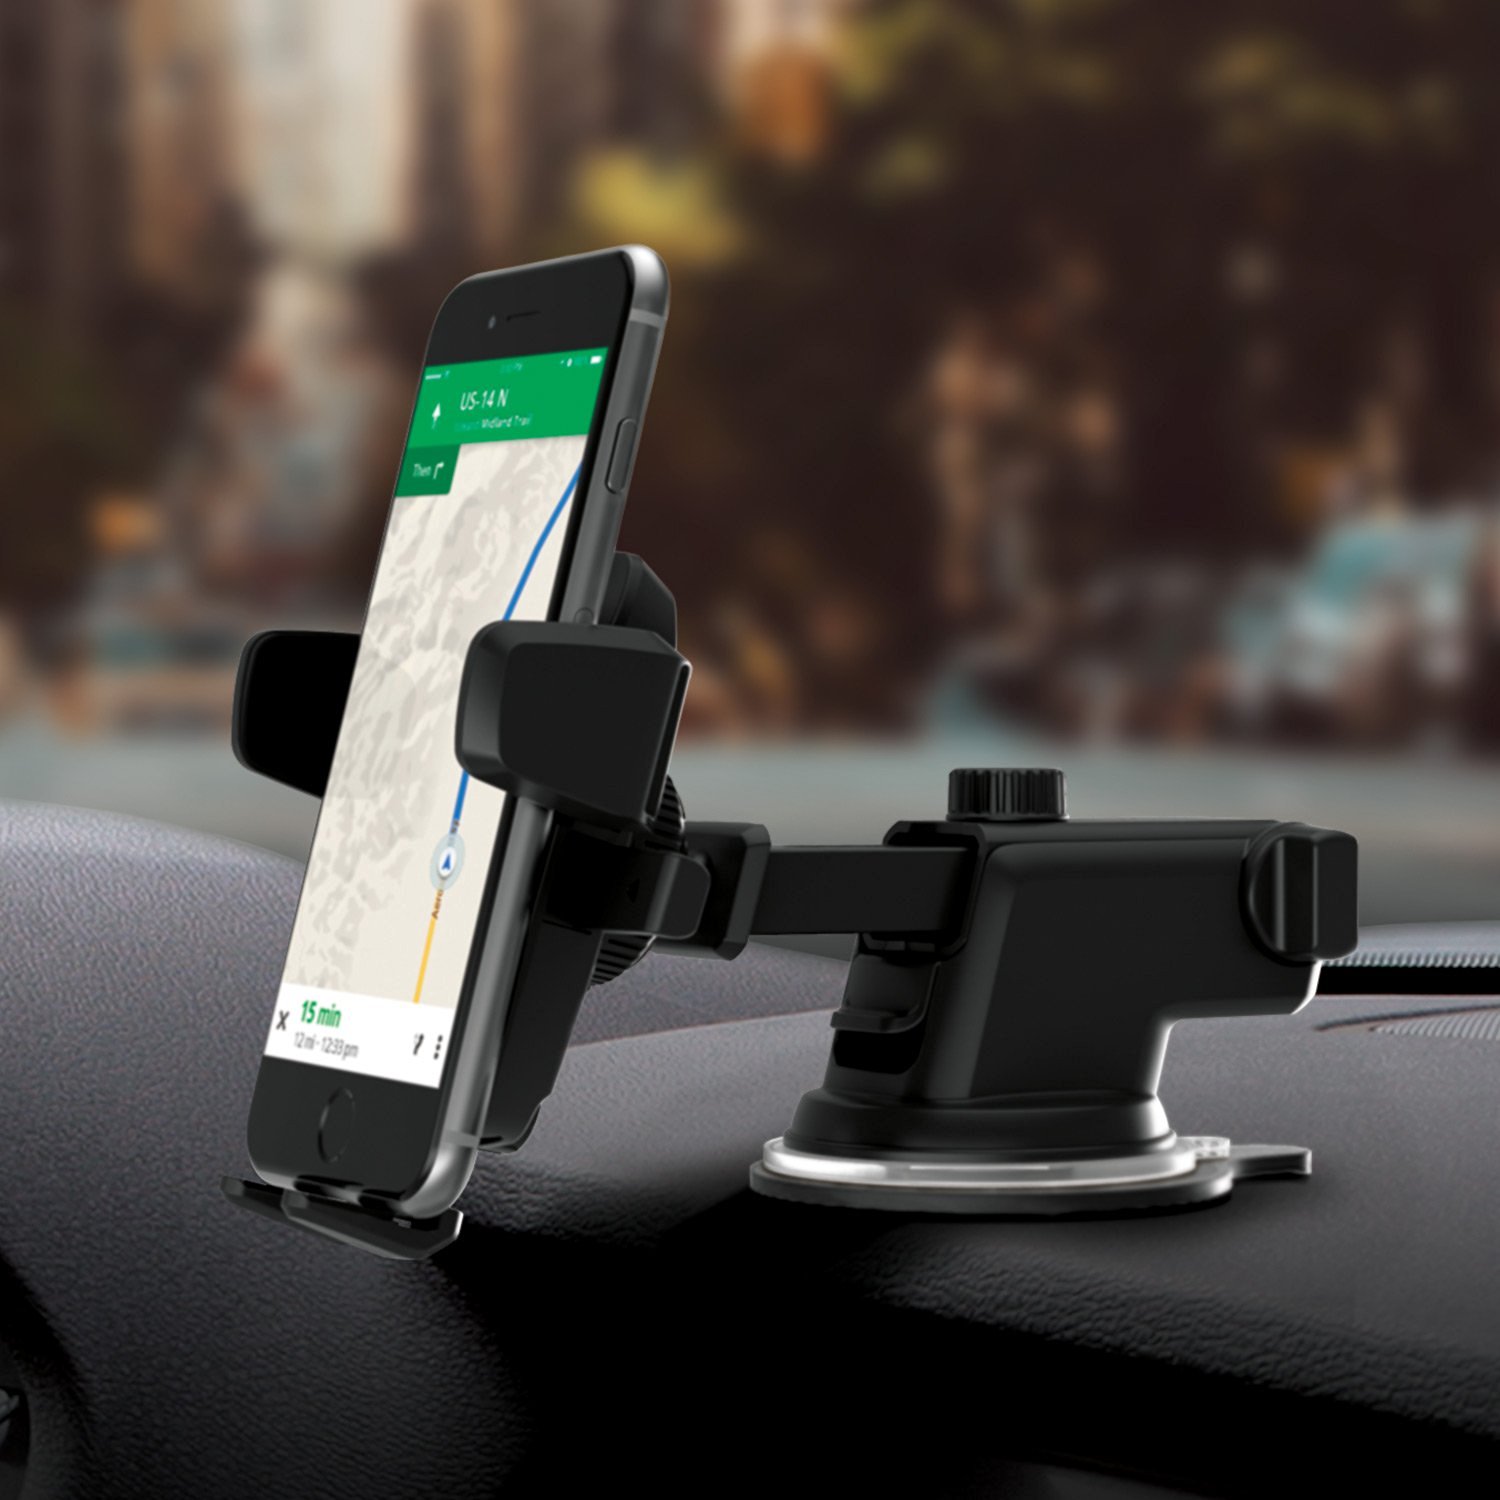 Top 5 Best Dashboard Car Mount Cell Phone Holder For iPhone 7 and